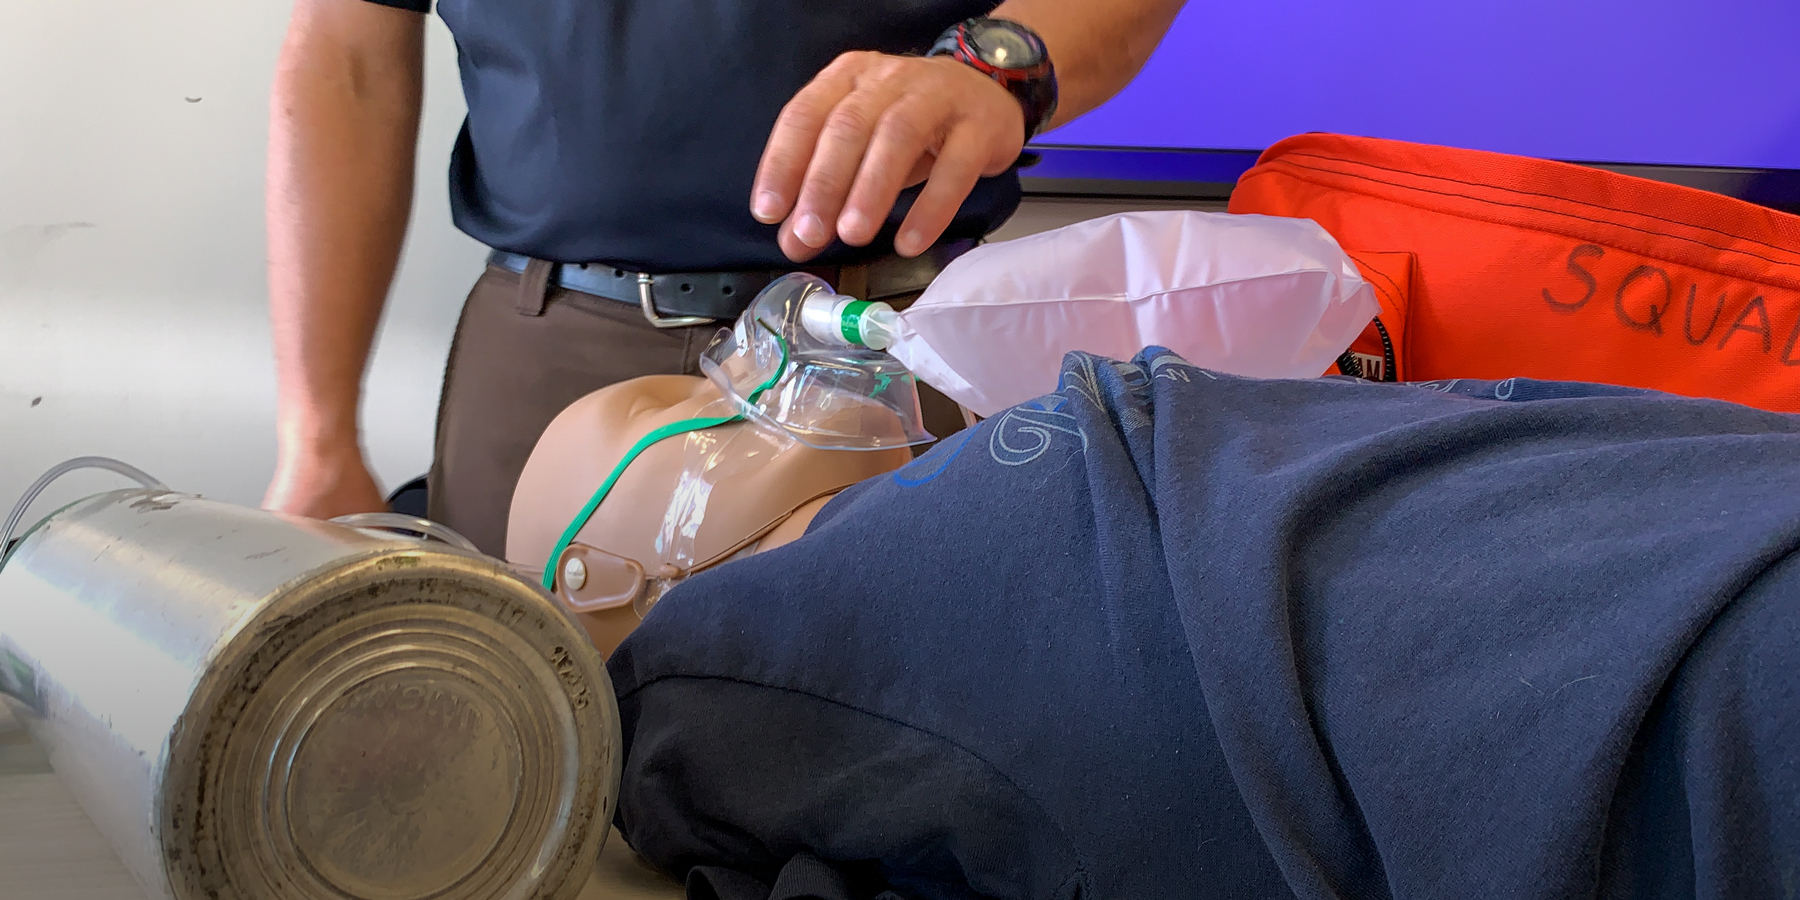 The EMT class practices putting an oxygen mask on a simulation mannequin.